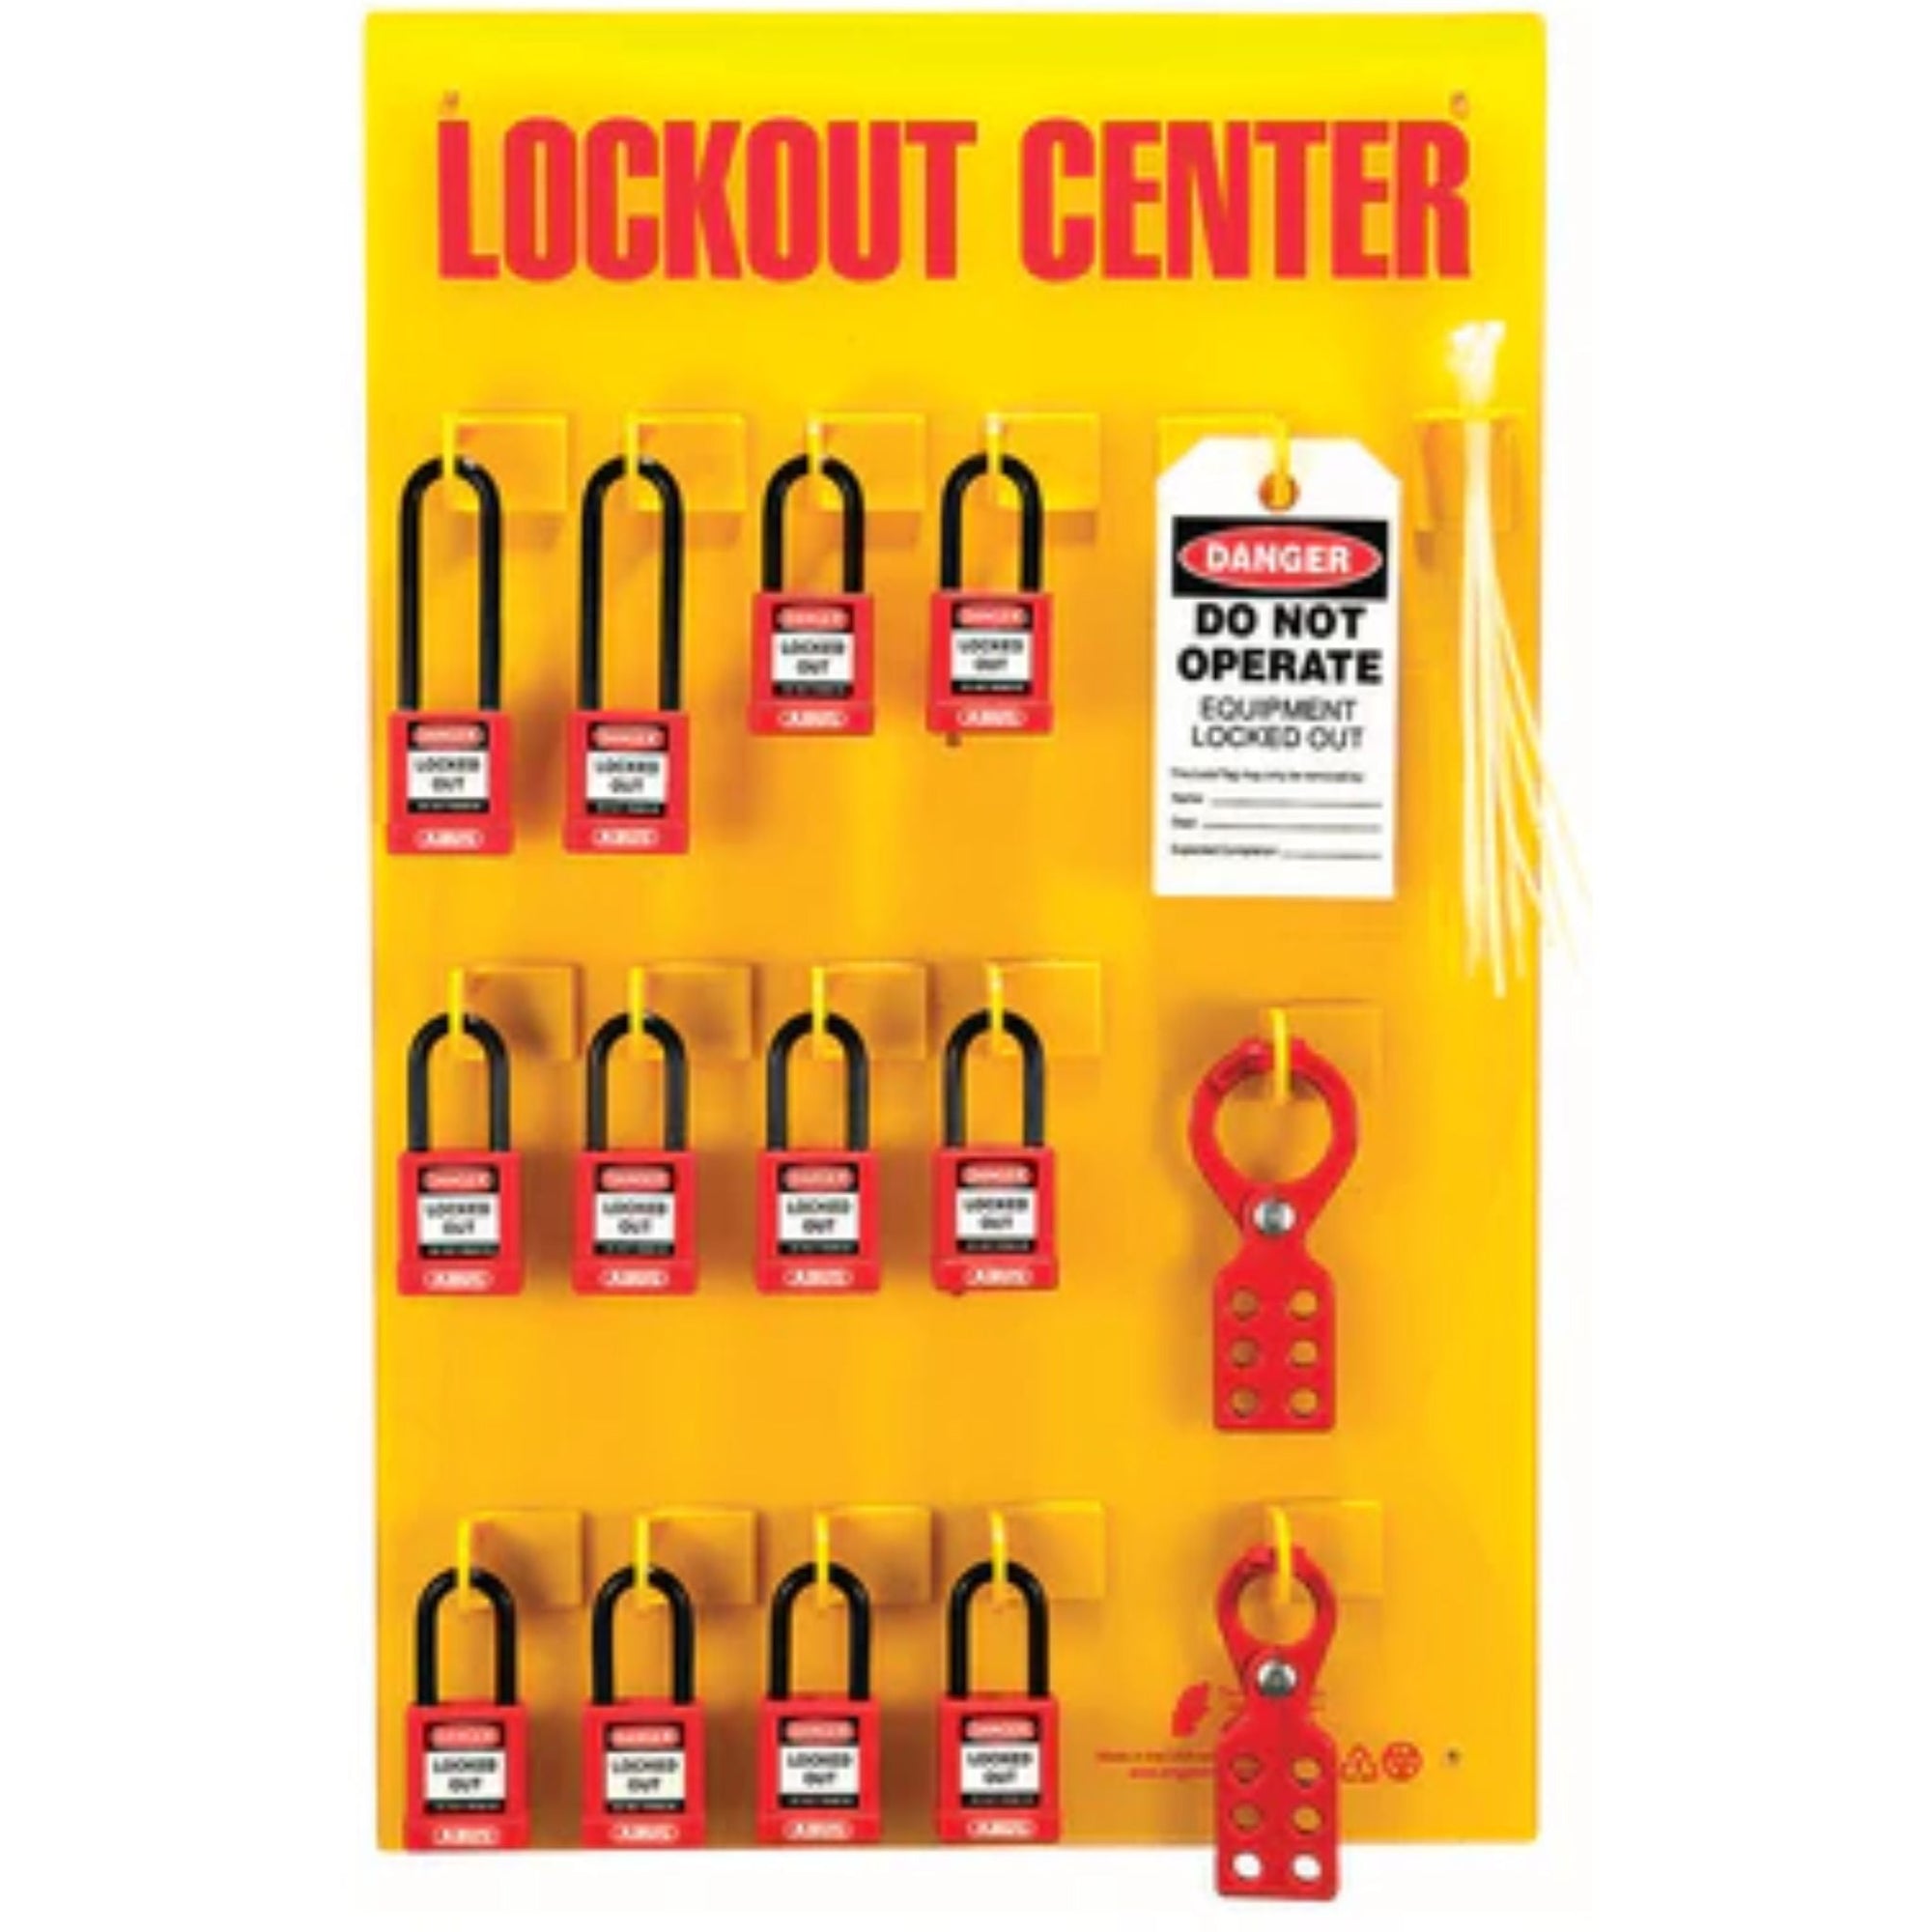 Abus K984 (71150) Large Lockout Board Includes 12 Locks, 2 Hasps & 10 Tags for LOTO Compliance - The Lock Source